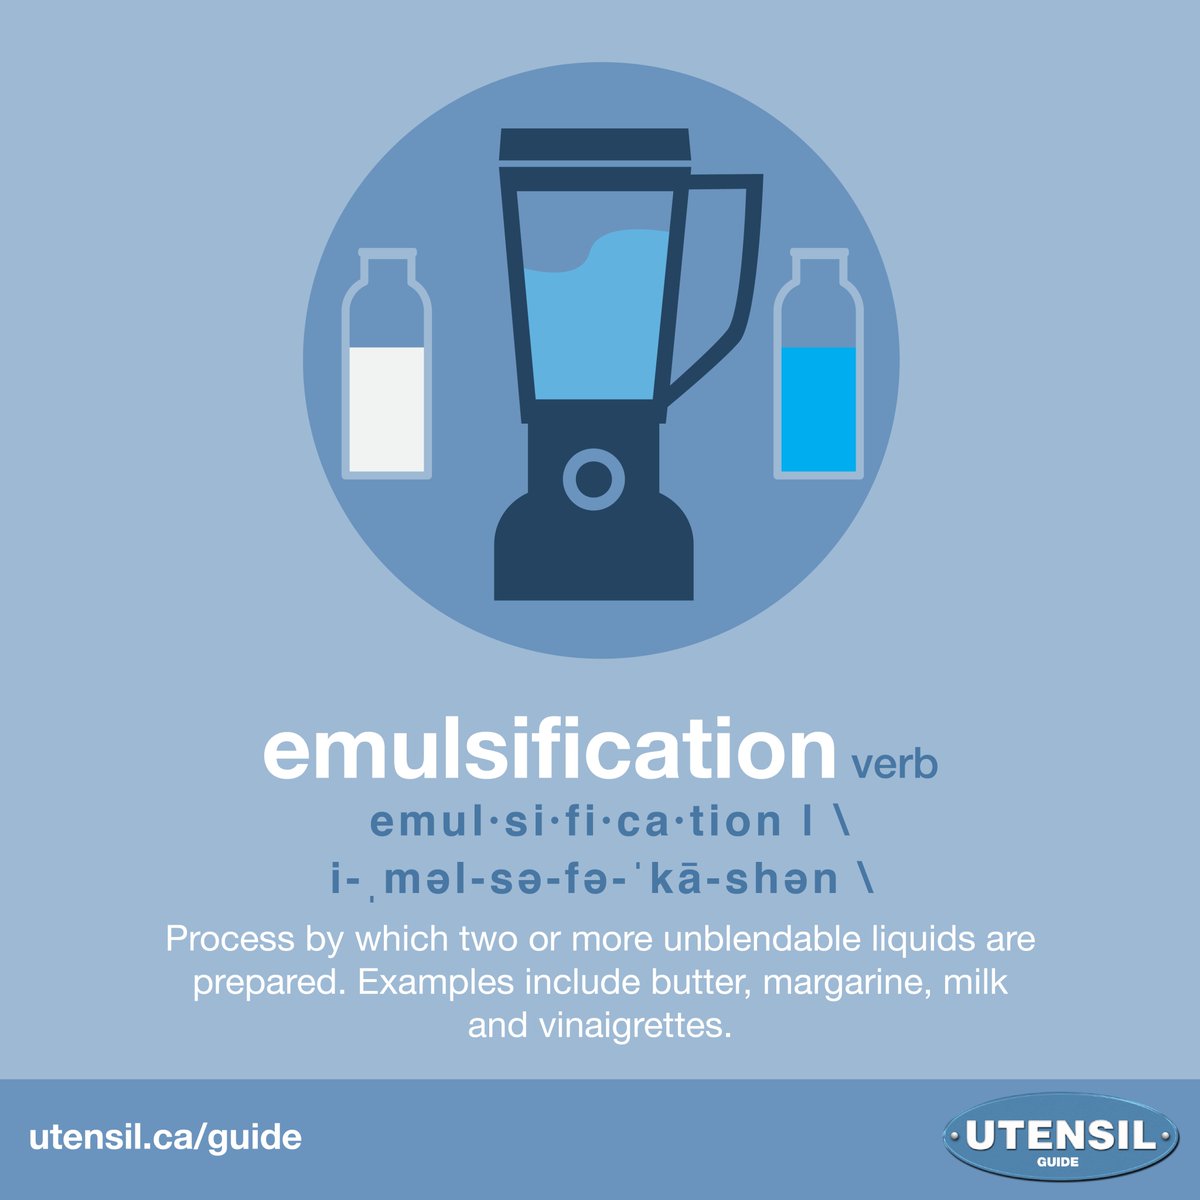 EMULSIFICATION (verb) Process by which two or more unblendable liquids are prepared. Examples include butter, margarine, milk and vinaigrettes. #UtensilGuide #CdnAg #CdnFood Learn more food & farming terms at: utensil.ca/guide